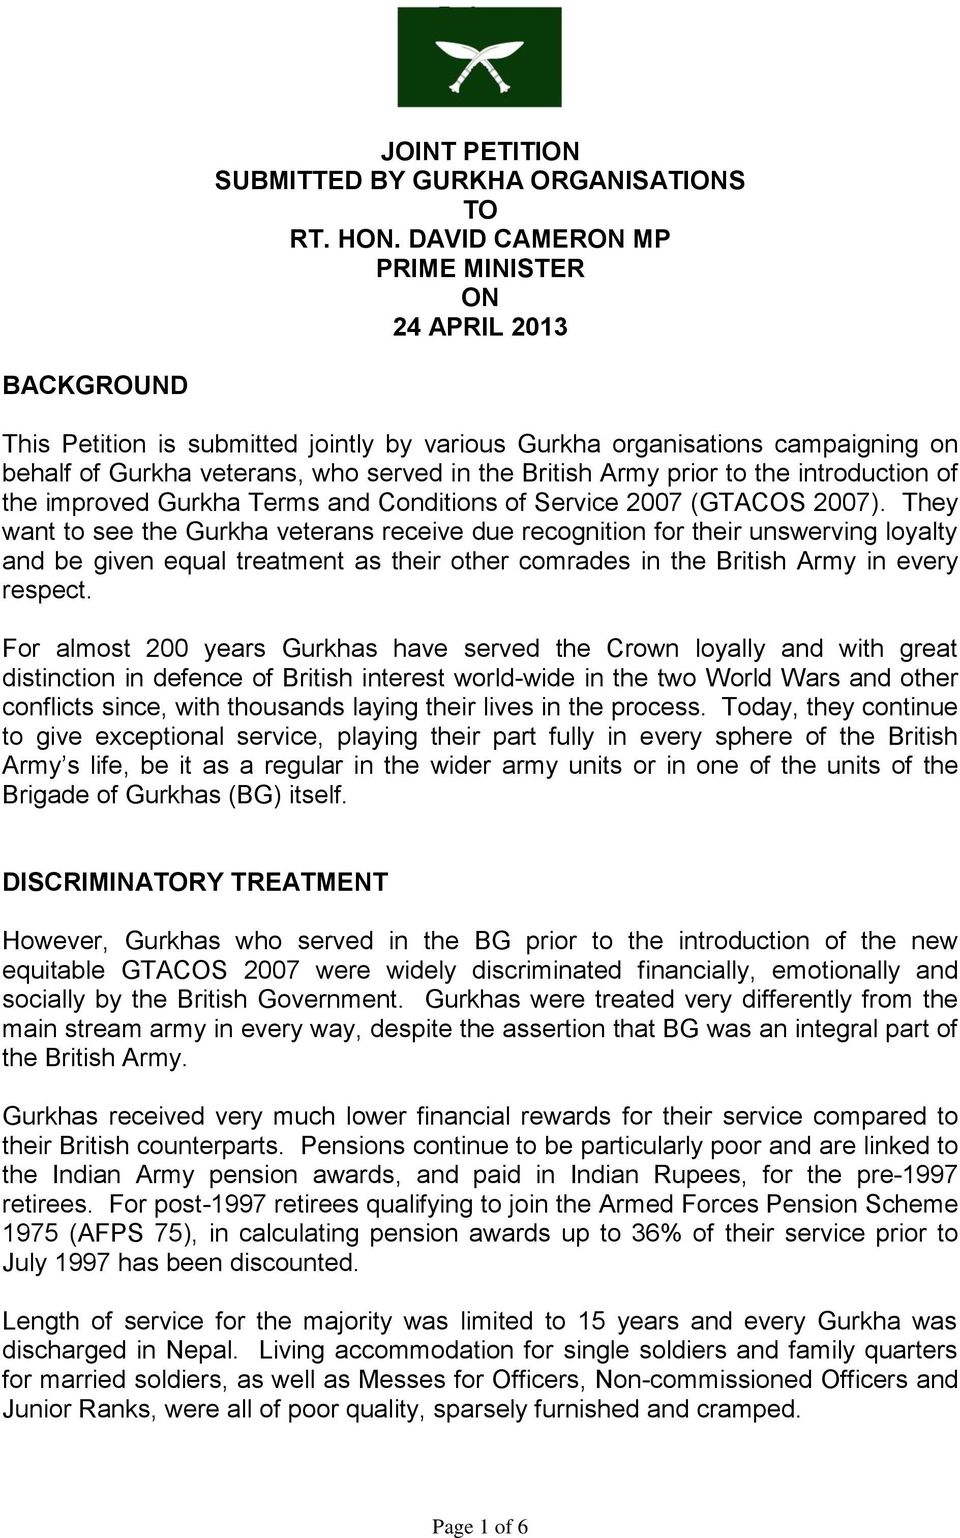 prior to the introduction of the improved Gurkha Terms and Conditions of Service 2007 (GTACOS 2007).